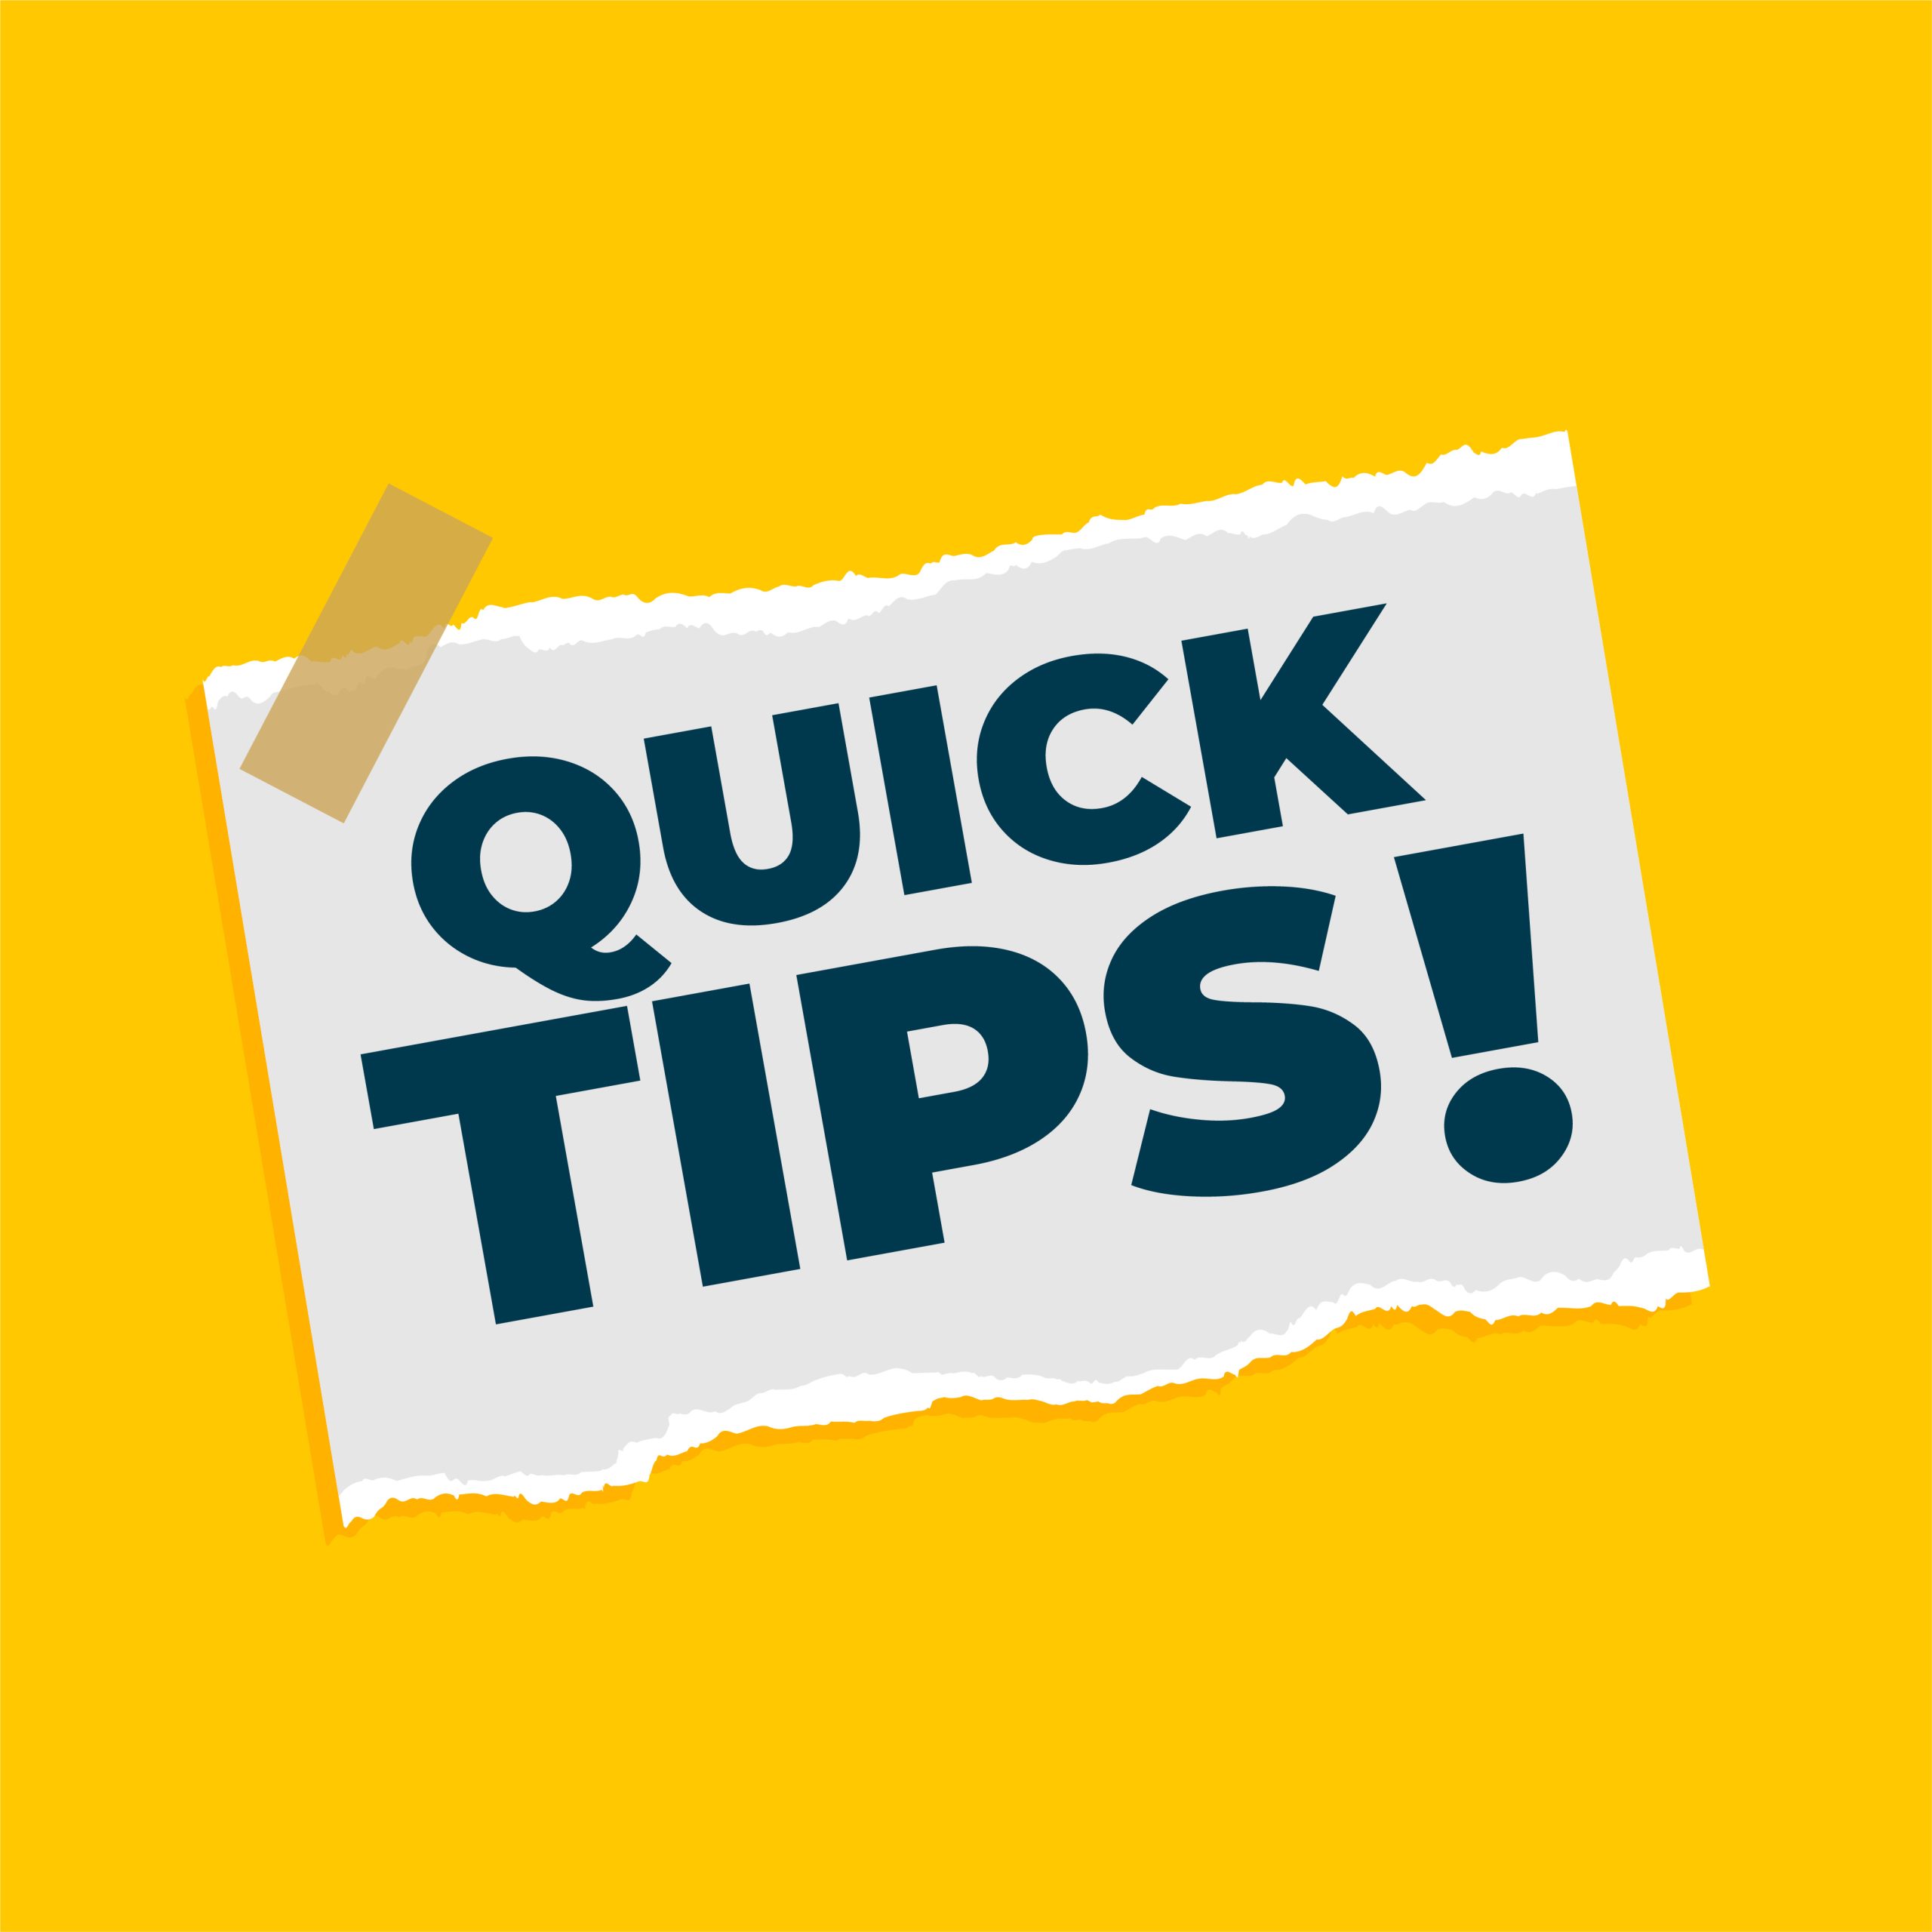 A note saying &quot;Quick tips&quot; on yellow background